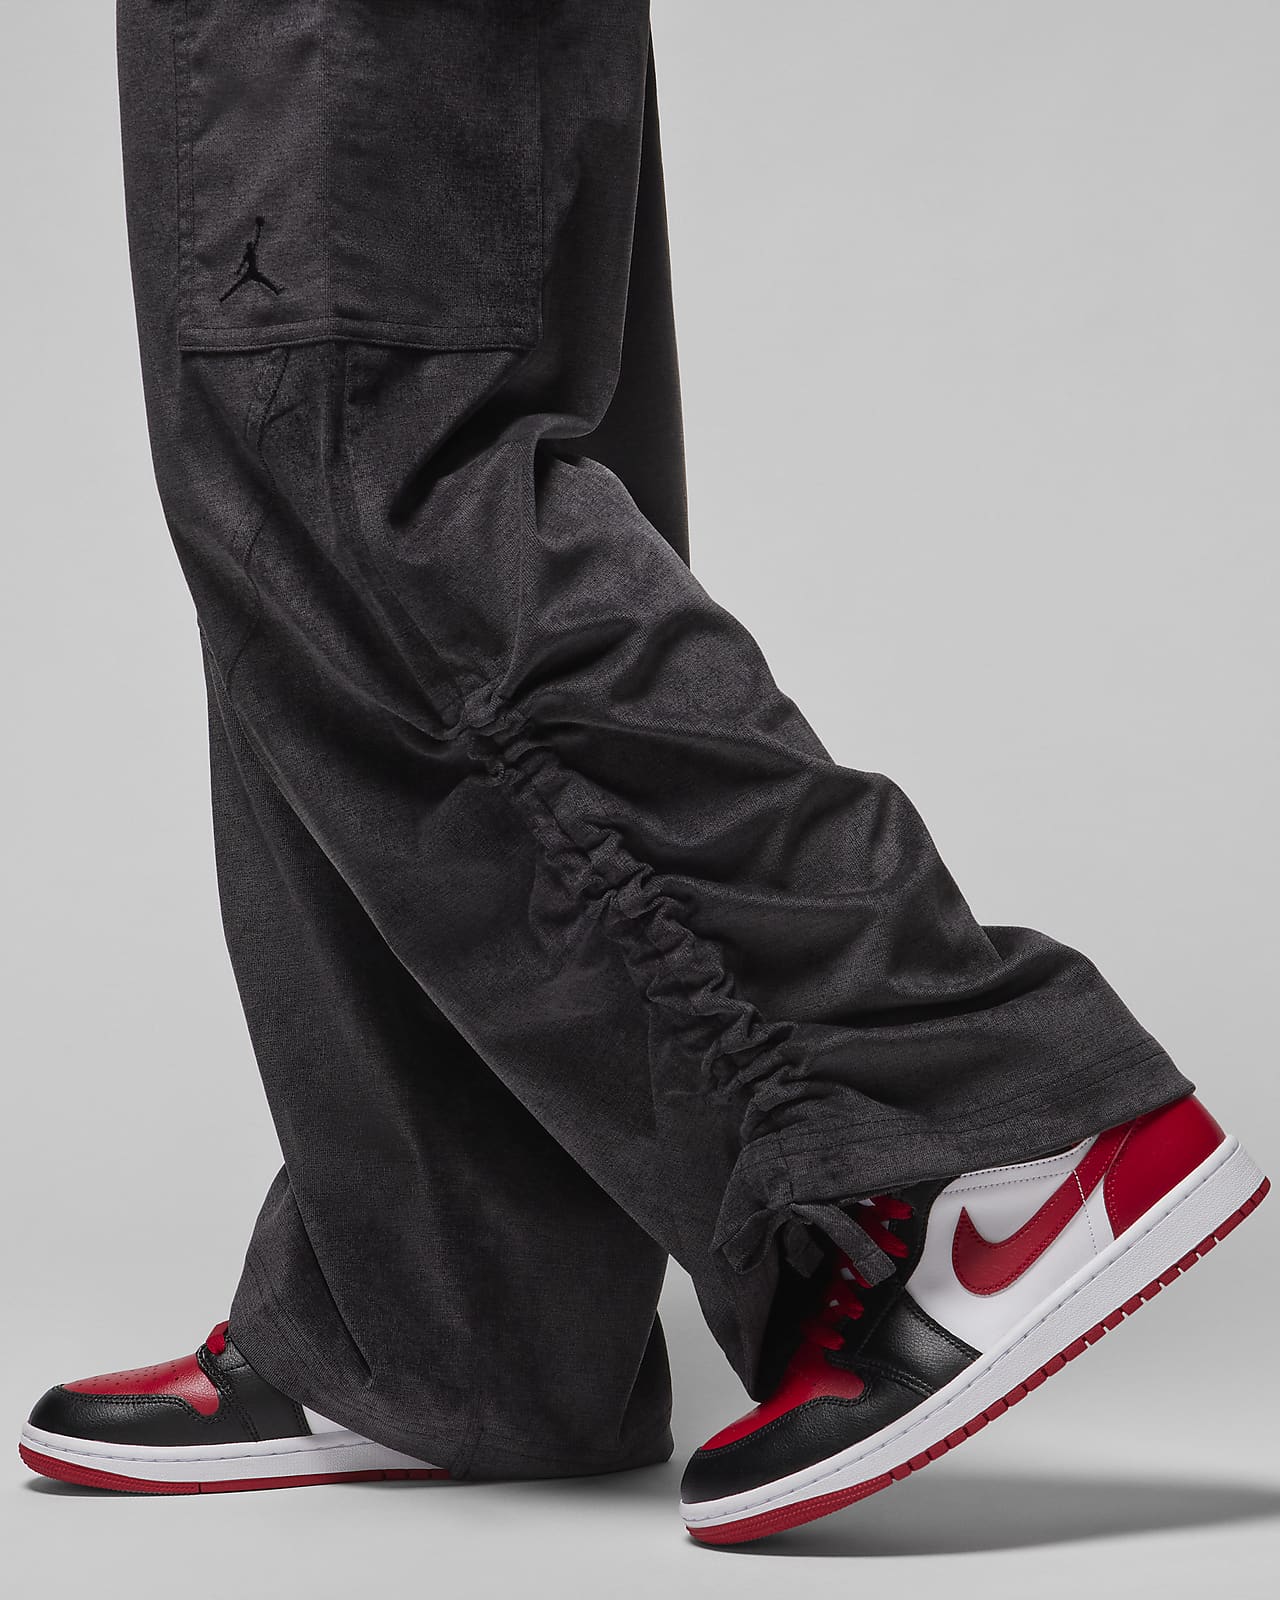  Other Stories Relaxed Corduroy Trousers in Dark Red